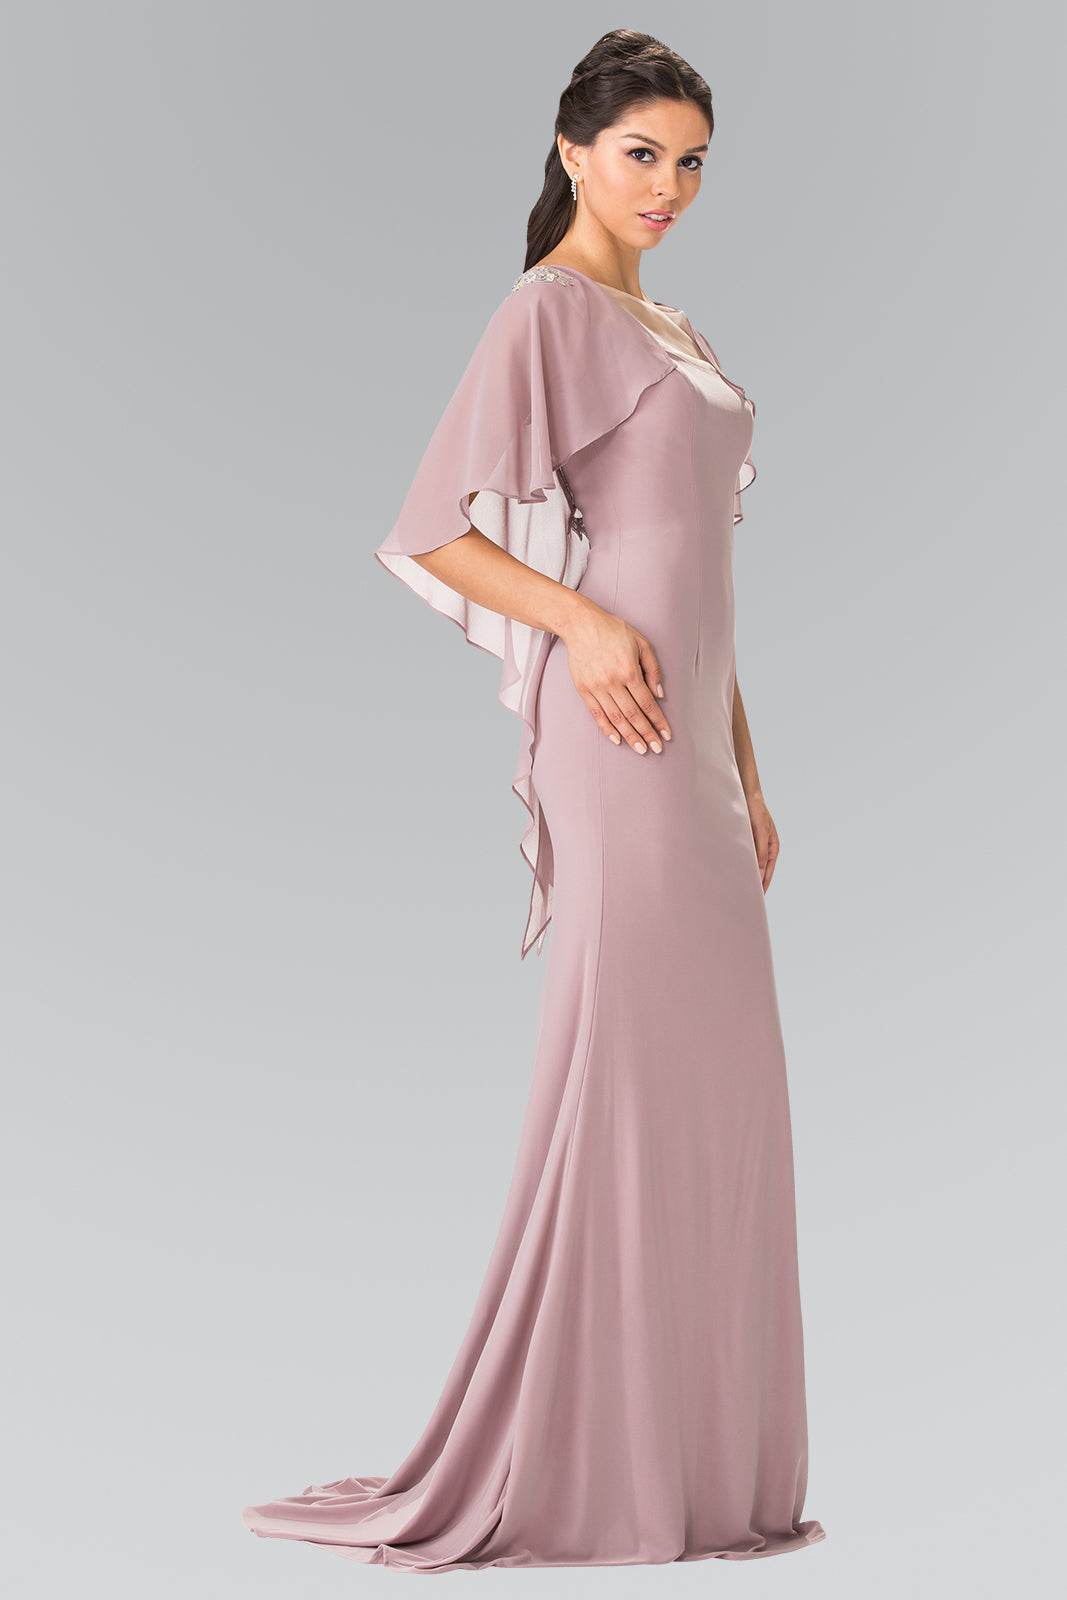 Sleeveless Jersey Long Dress with Attached Cape that Drapes Down the Back GLGL2254 Elsy Style MOTHER OF BRIDE